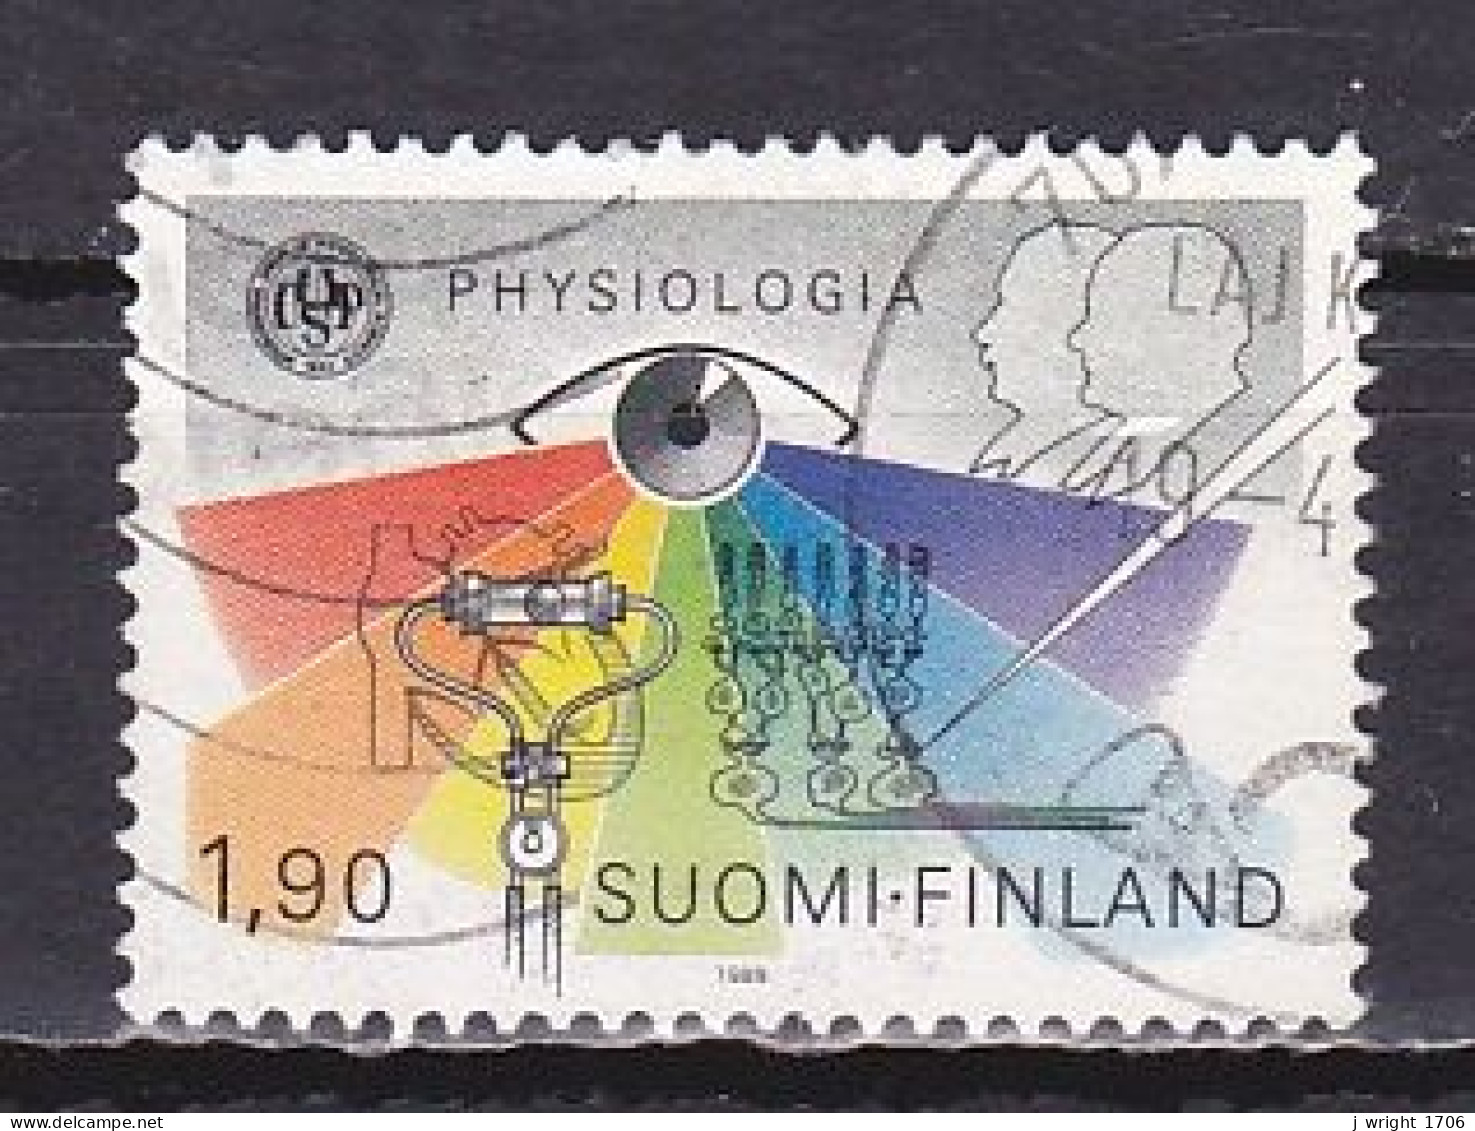 Finland, 1989, International Physiology Cong, 1.90mk, USED - Used Stamps